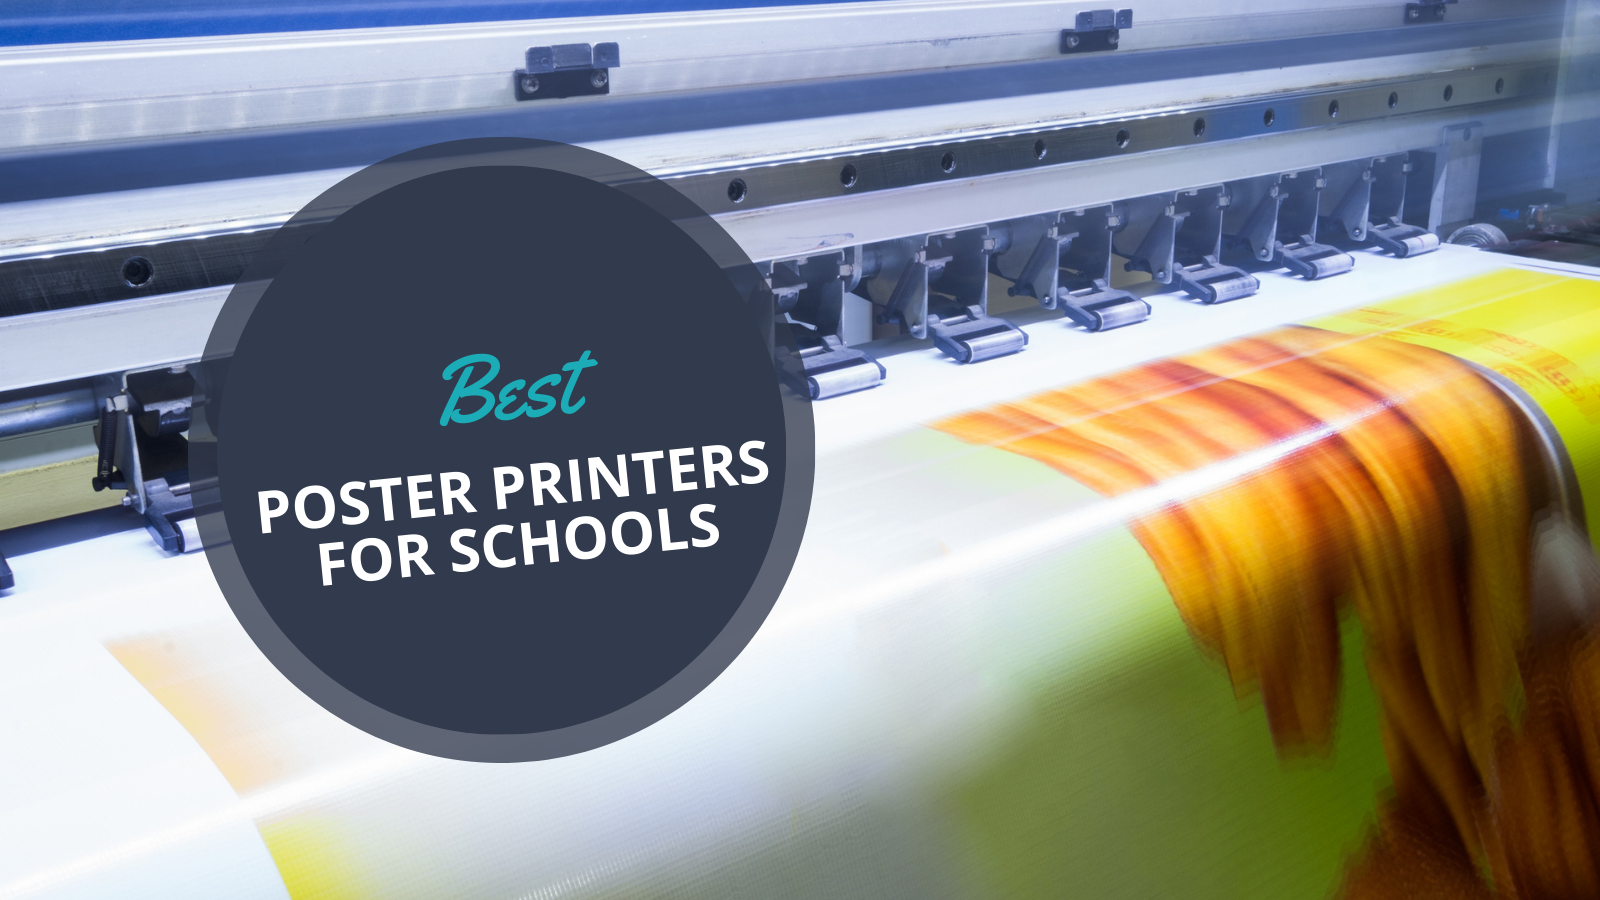 Best poster printers for schools with close up of a poster printing.